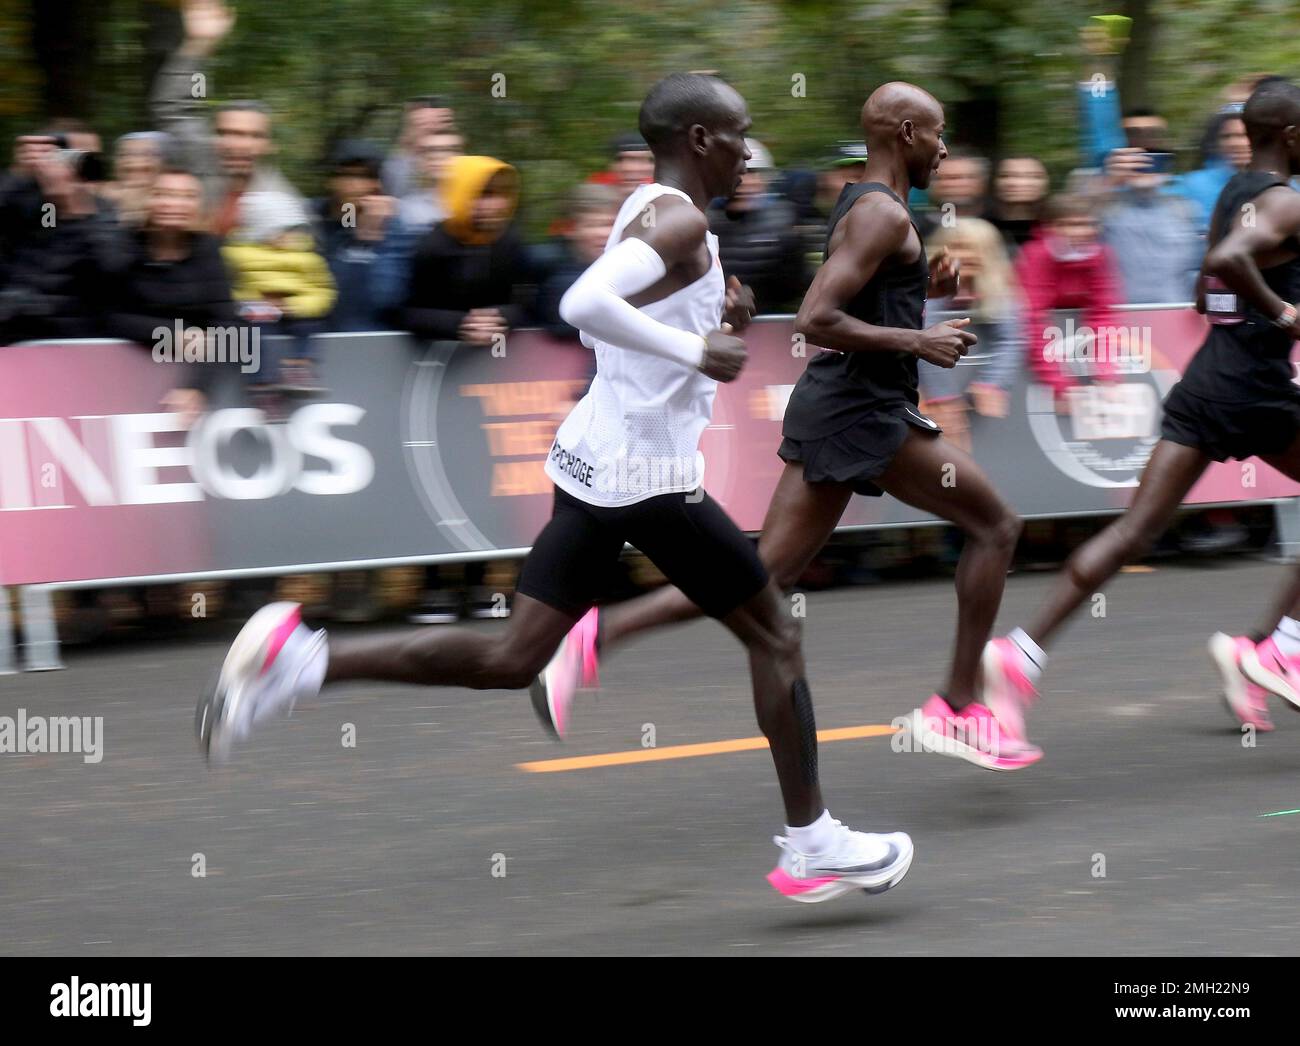 In this Oct. 12, 2019 photo, marathon runner Eliud Kipchoge from Kenya, white vest, wearing Nike AlphaFly prototype running shoe, and his pacemaking team, wearing pink Nike Vaporfly shoes, during the